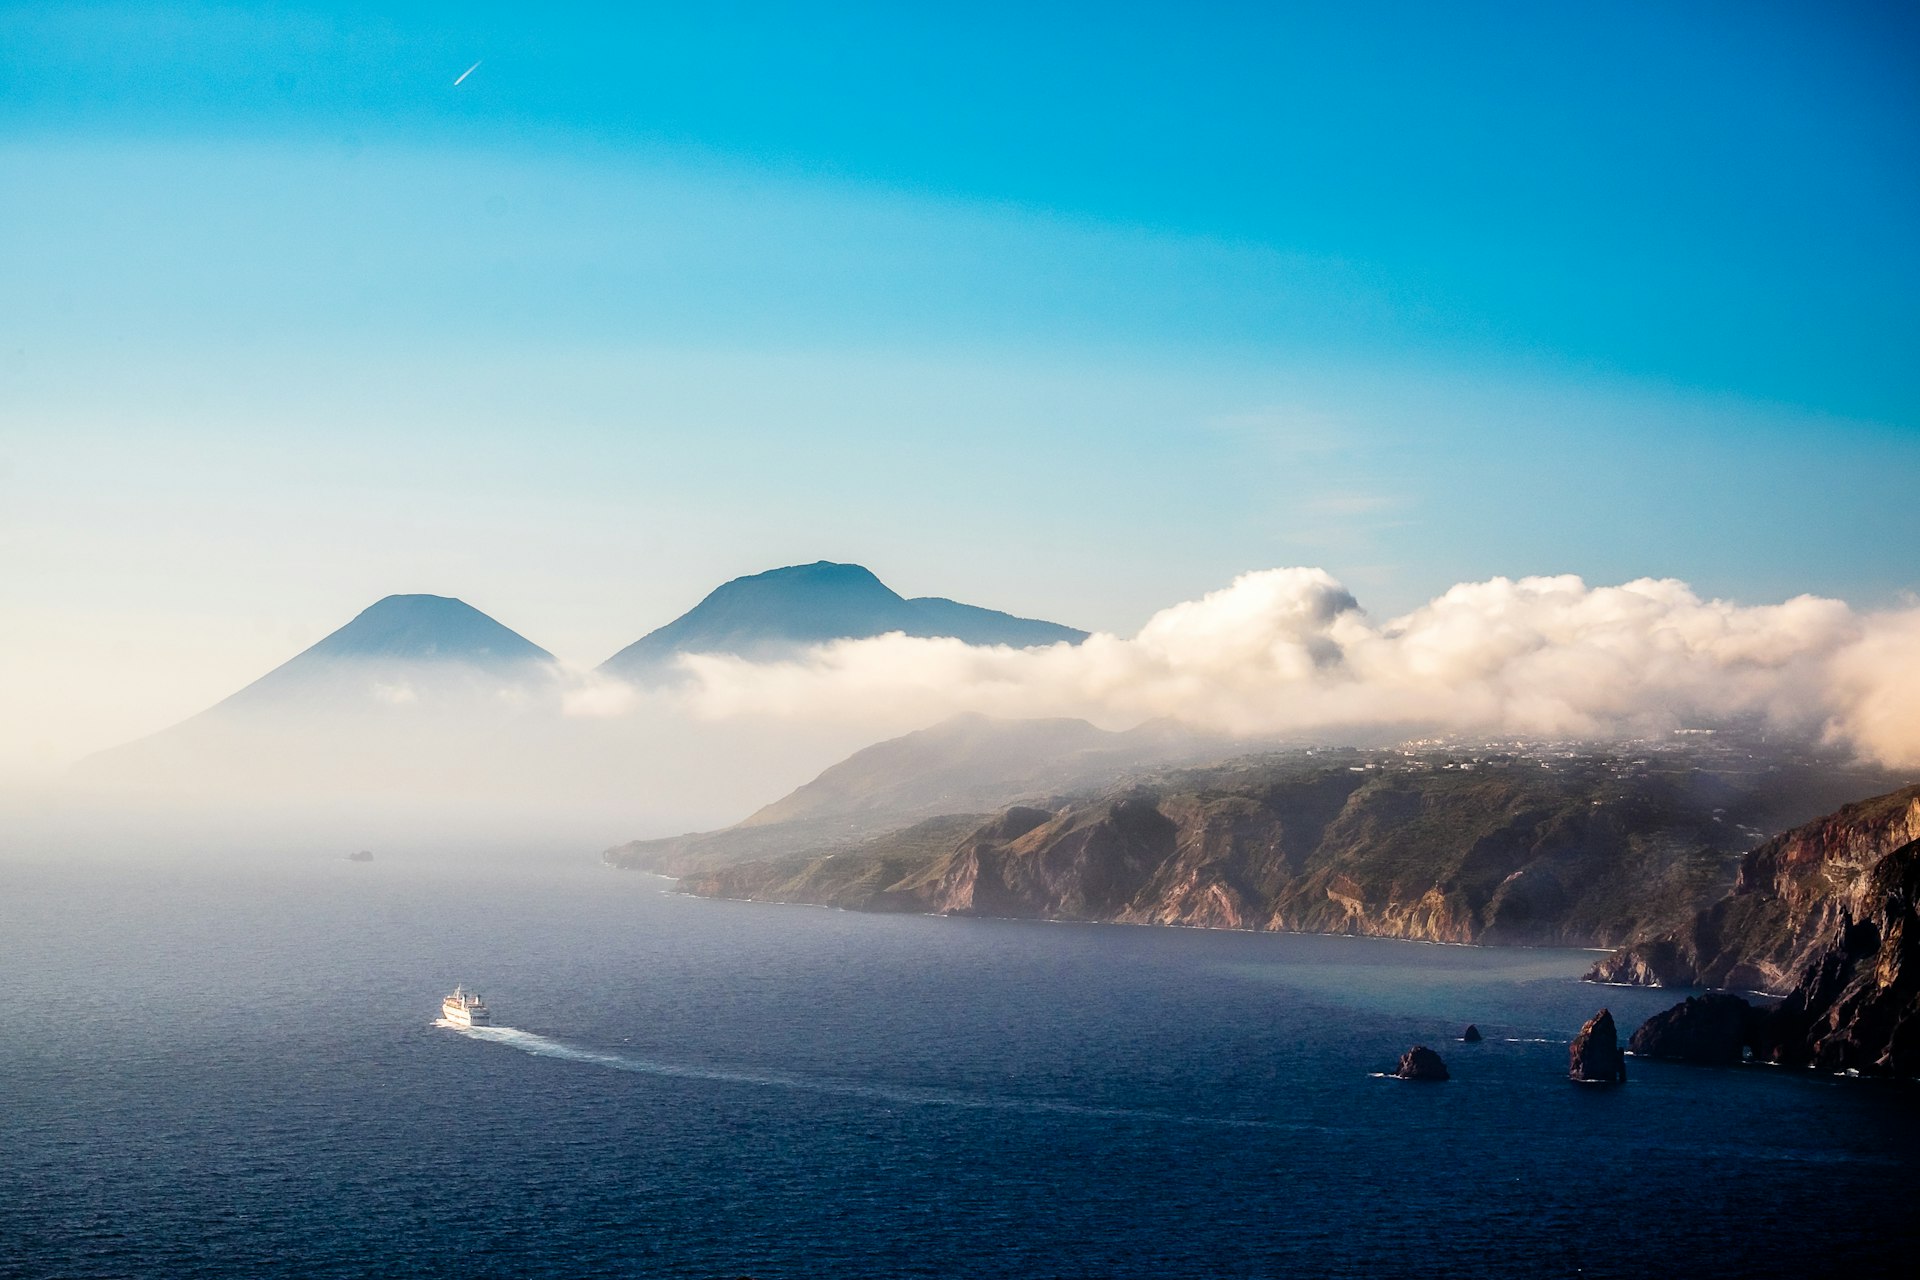 A ferry leaves a long curve of white water in its wake as it travels between craggy. mist-covered volcanic islands